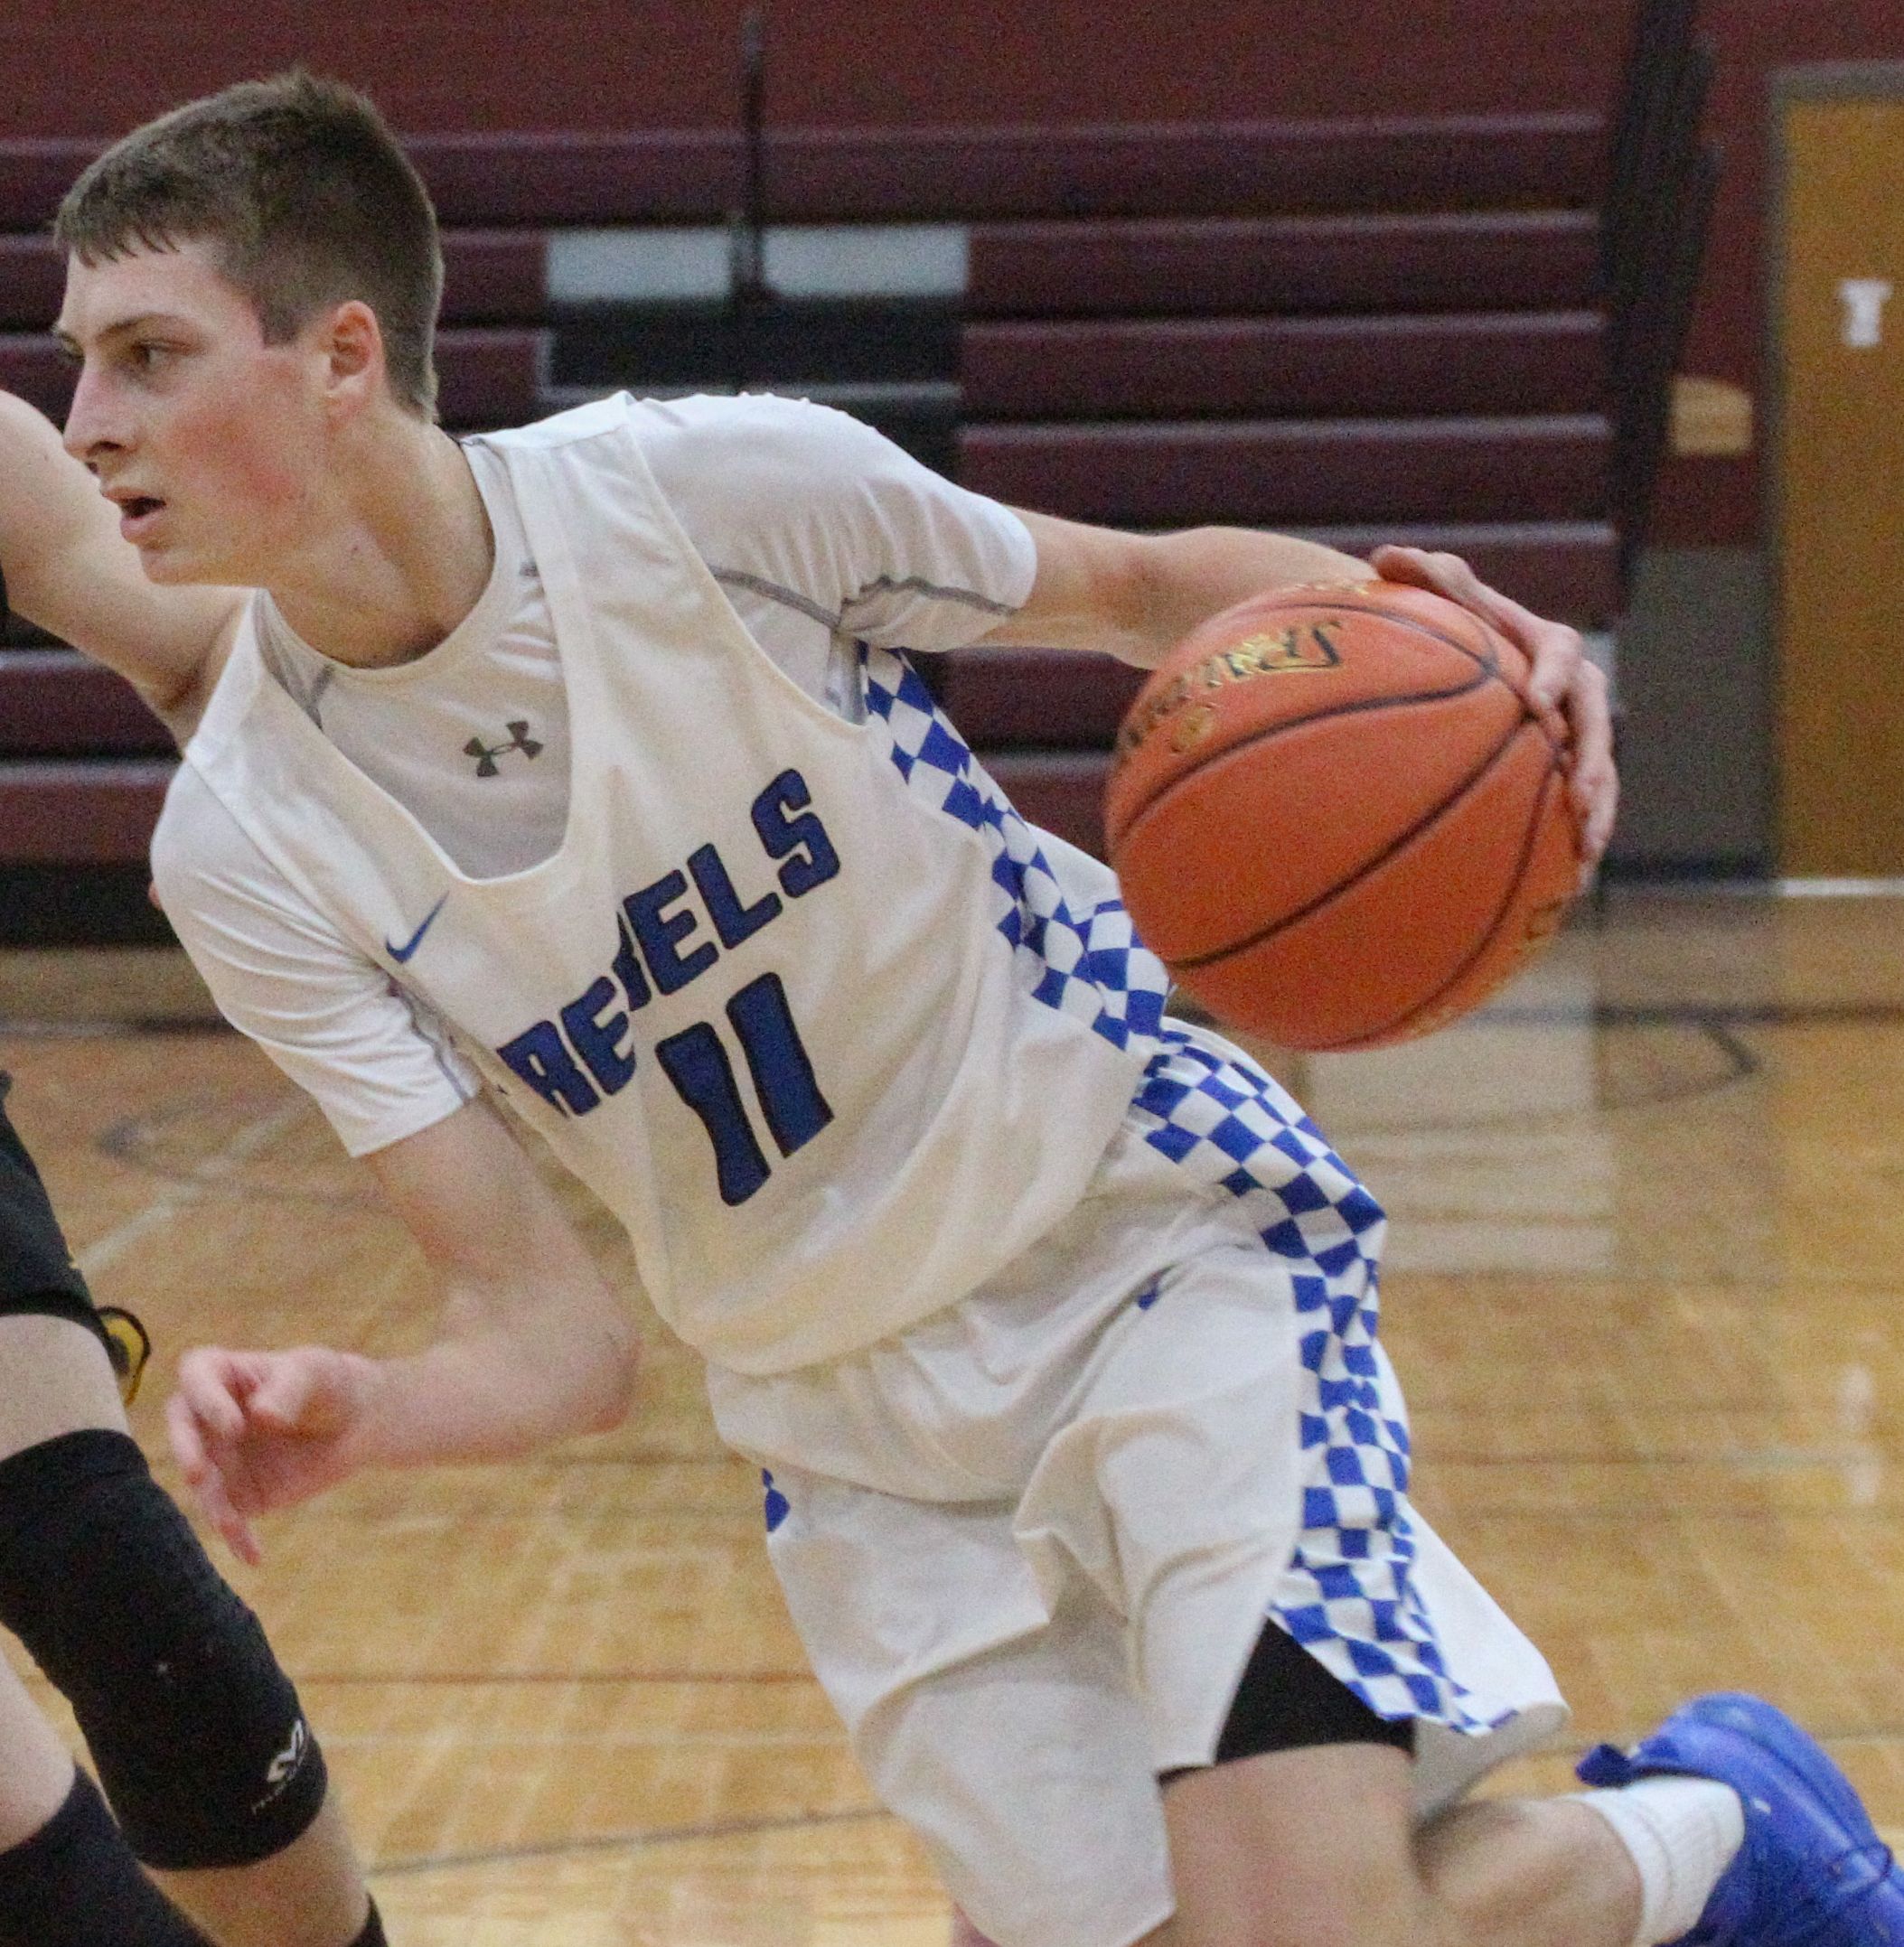 Gladbrook-Reinbeck boys basketball, led by sophomore and NICL West Outstanding Player William Kiburis, made the deepest run of the area boys basketball teams in 2021 as the Rebels bowed out to South Winneshiek in the substate final. (Jake Ryder photo)